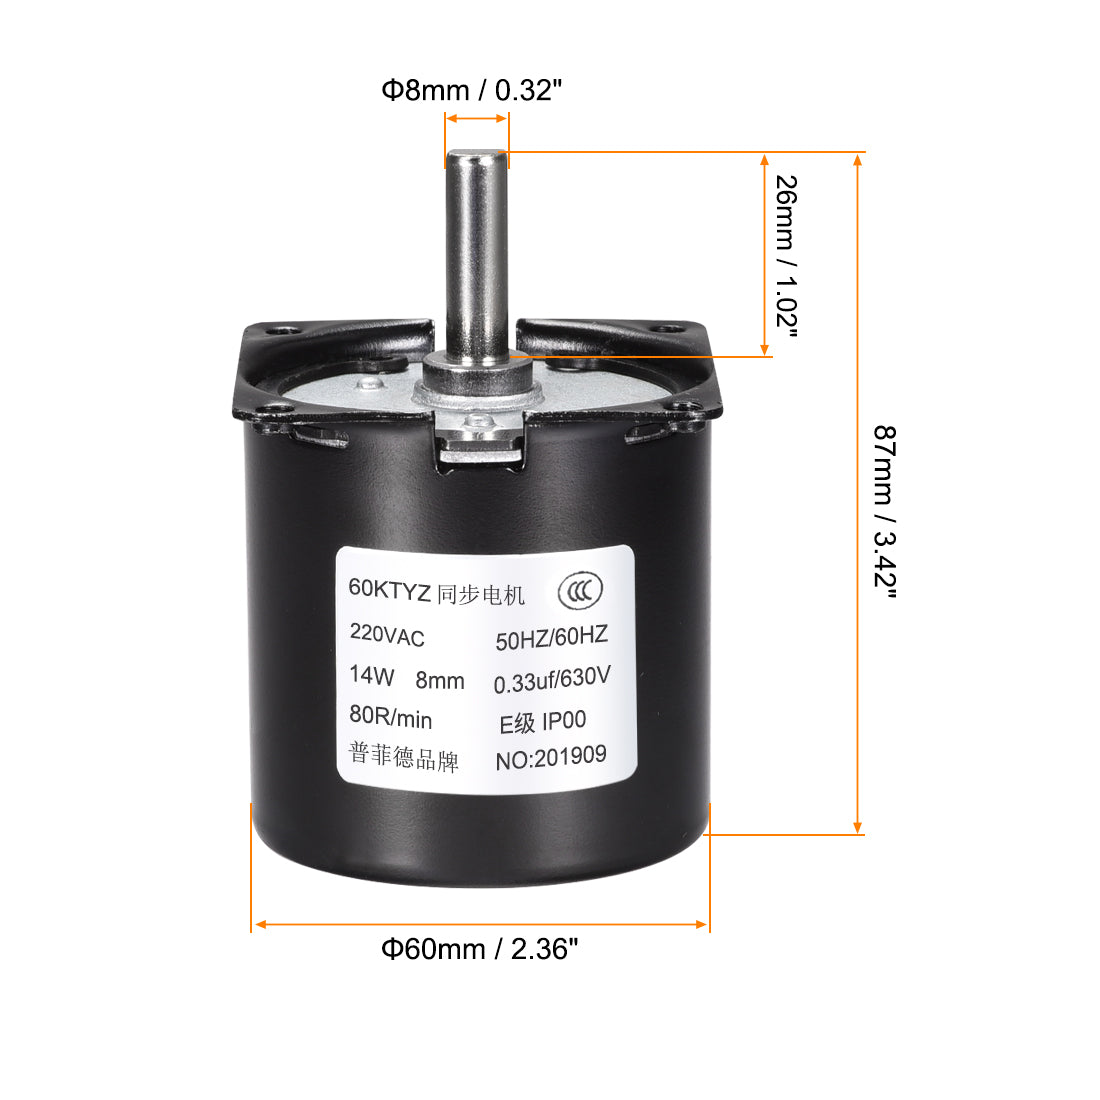 uxcell Uxcell AC 220V Electric Synchronous Motor Metal Gear Turntable /C 80RPM 50-60HZ 14W 8mm Dia Central Shaft